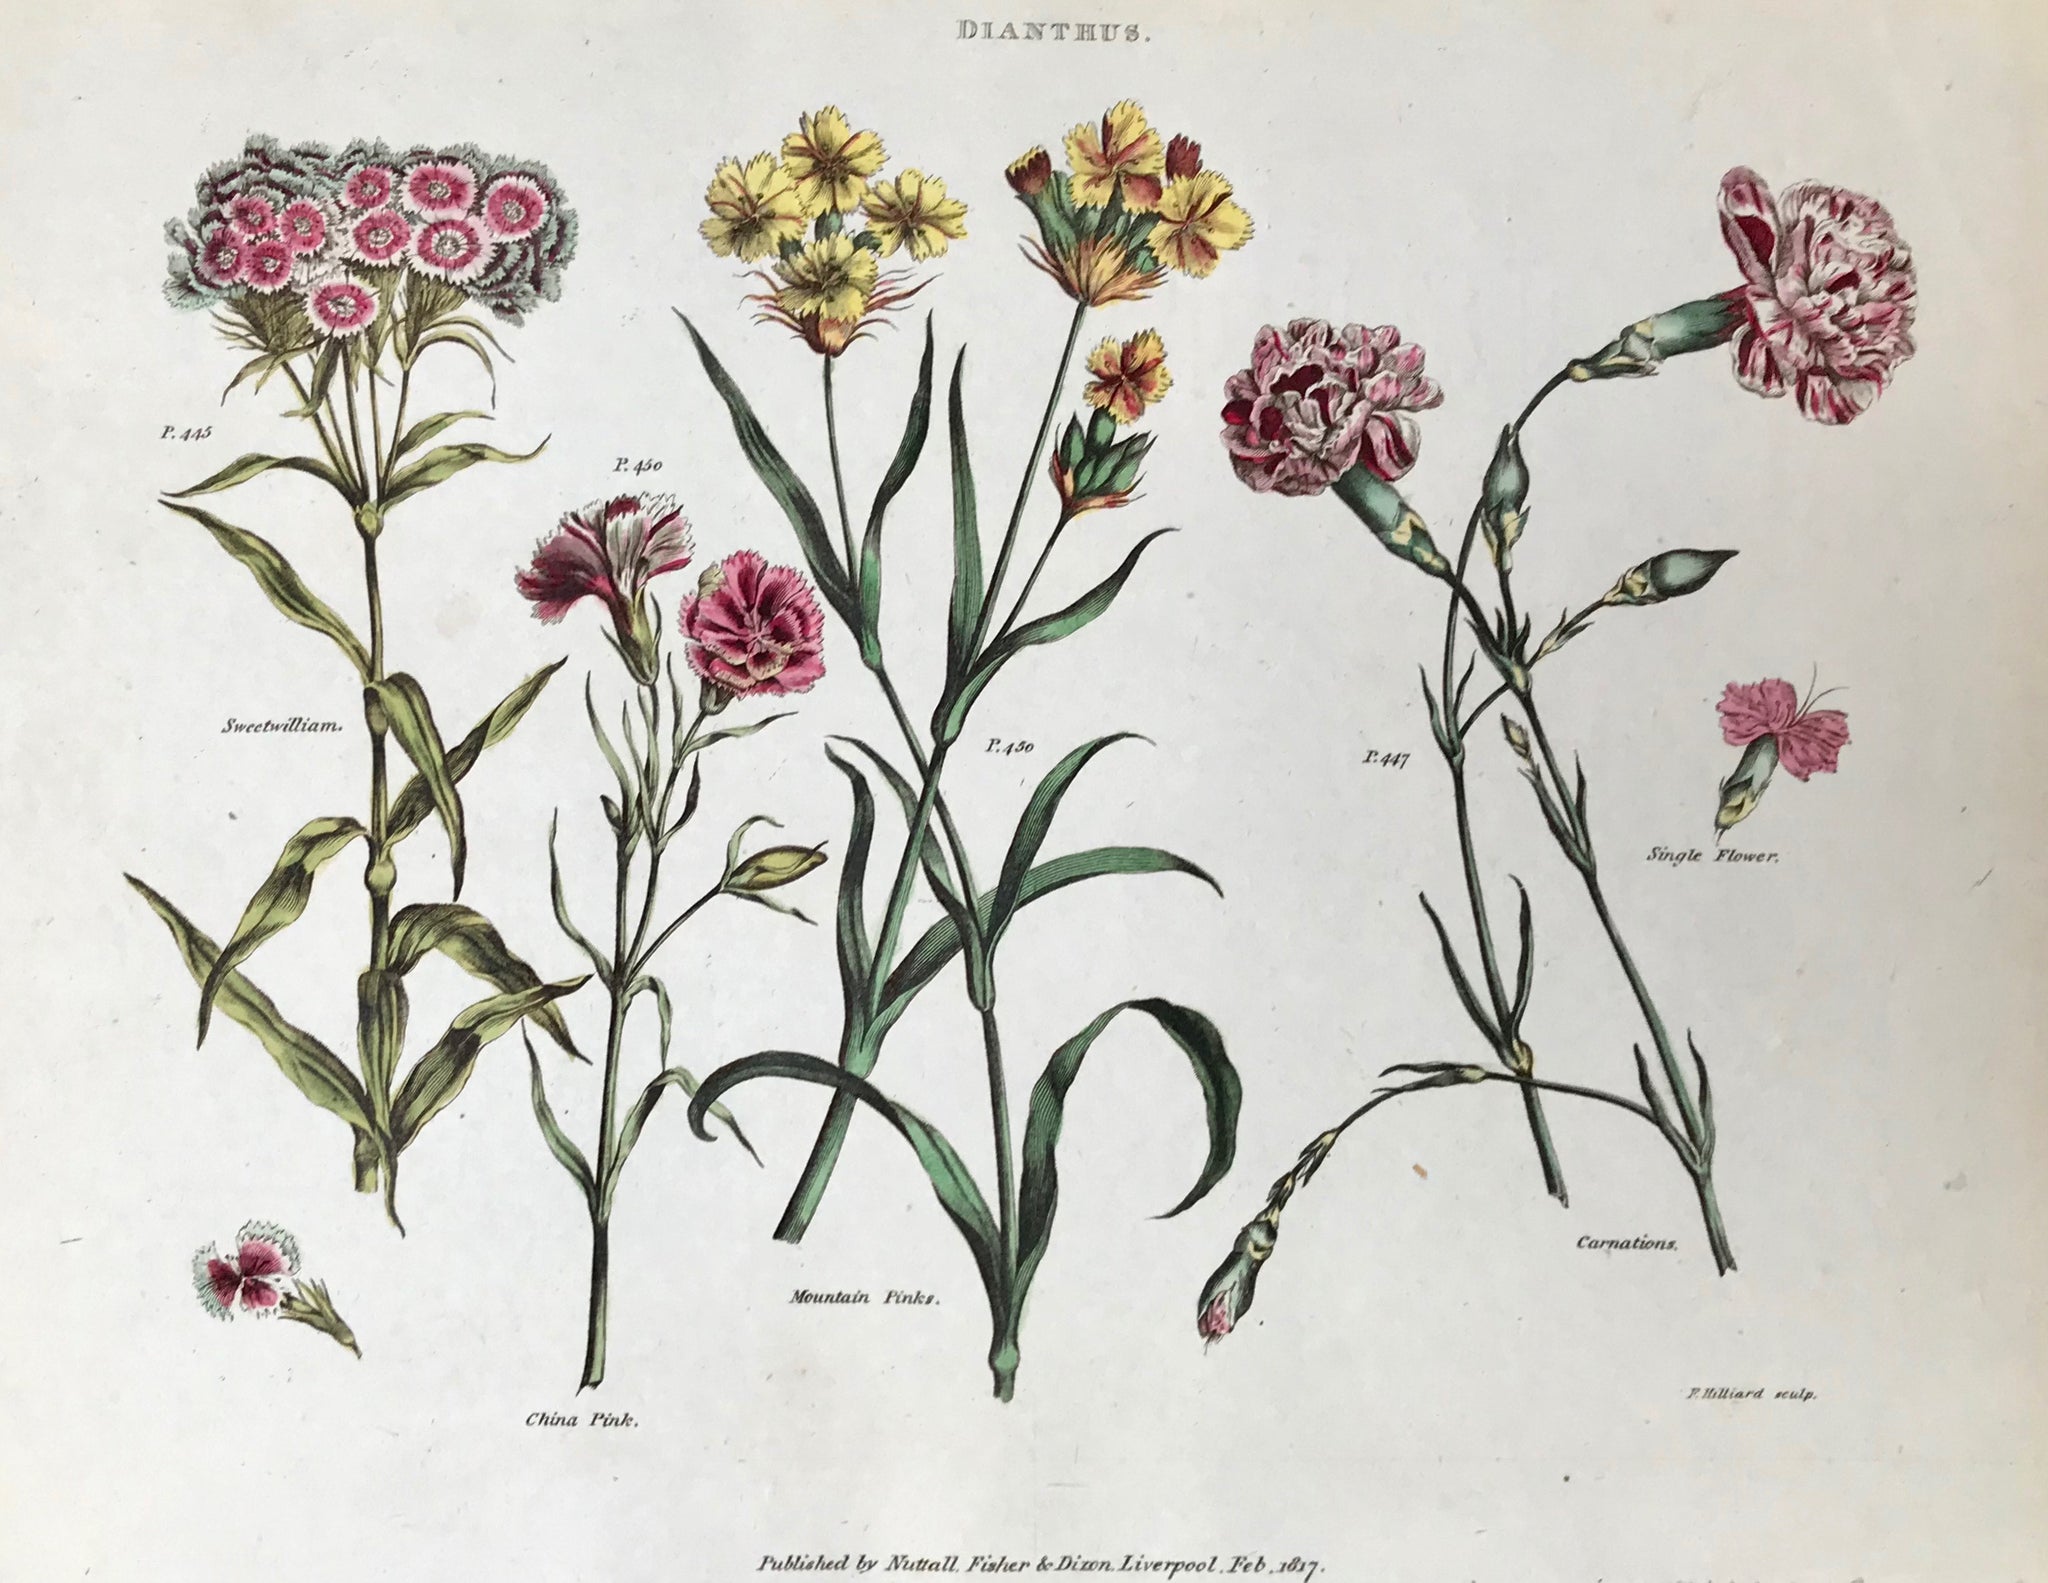    Dianthus  Sweet William China Pink Mountain Pinks Carnation  Antique Botanical Prints from  "The Universal Herbal" by Thomas Green.  The complete title of this accurately and absolutely delightfully hand-colored work is: "The Universal Herbal", or Botanical, Medical, and Agricultural Dictionary